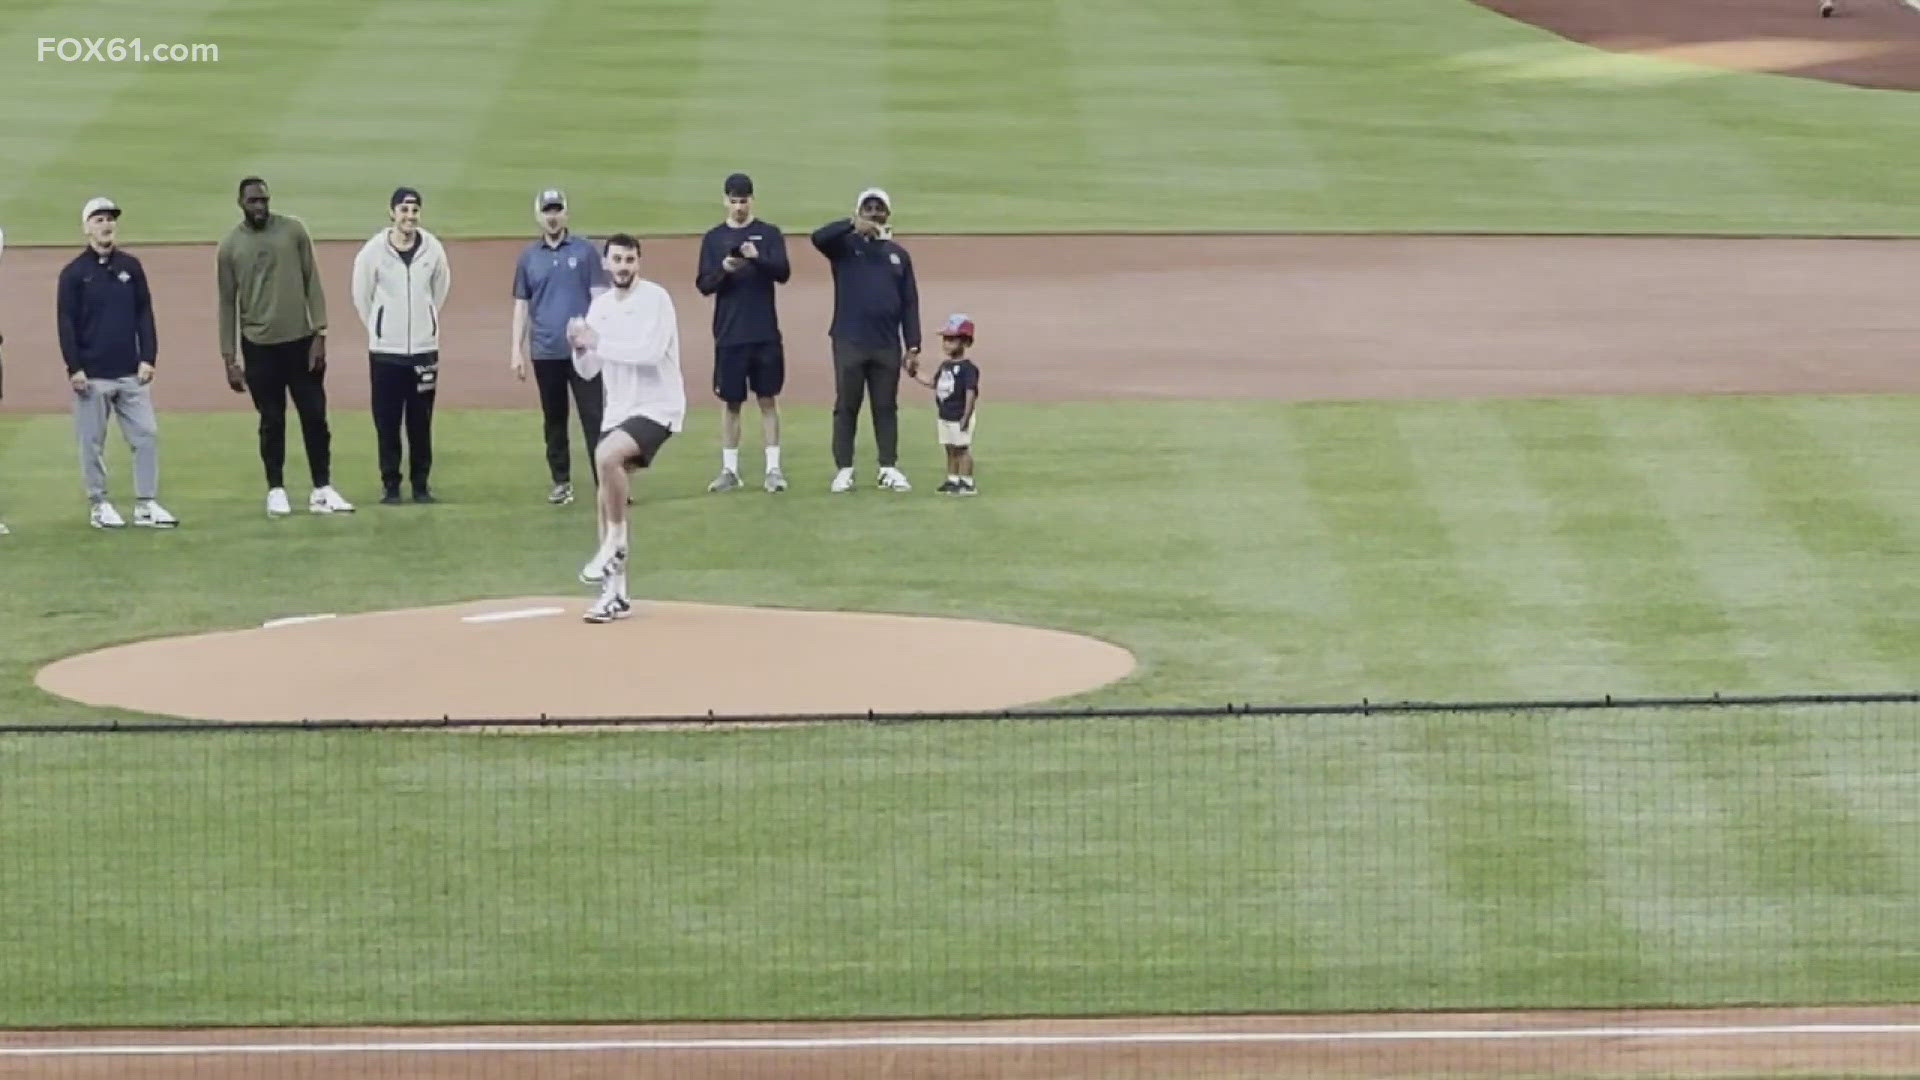 The back-to-back national champion threw a perfect pitch at Fenway Park.